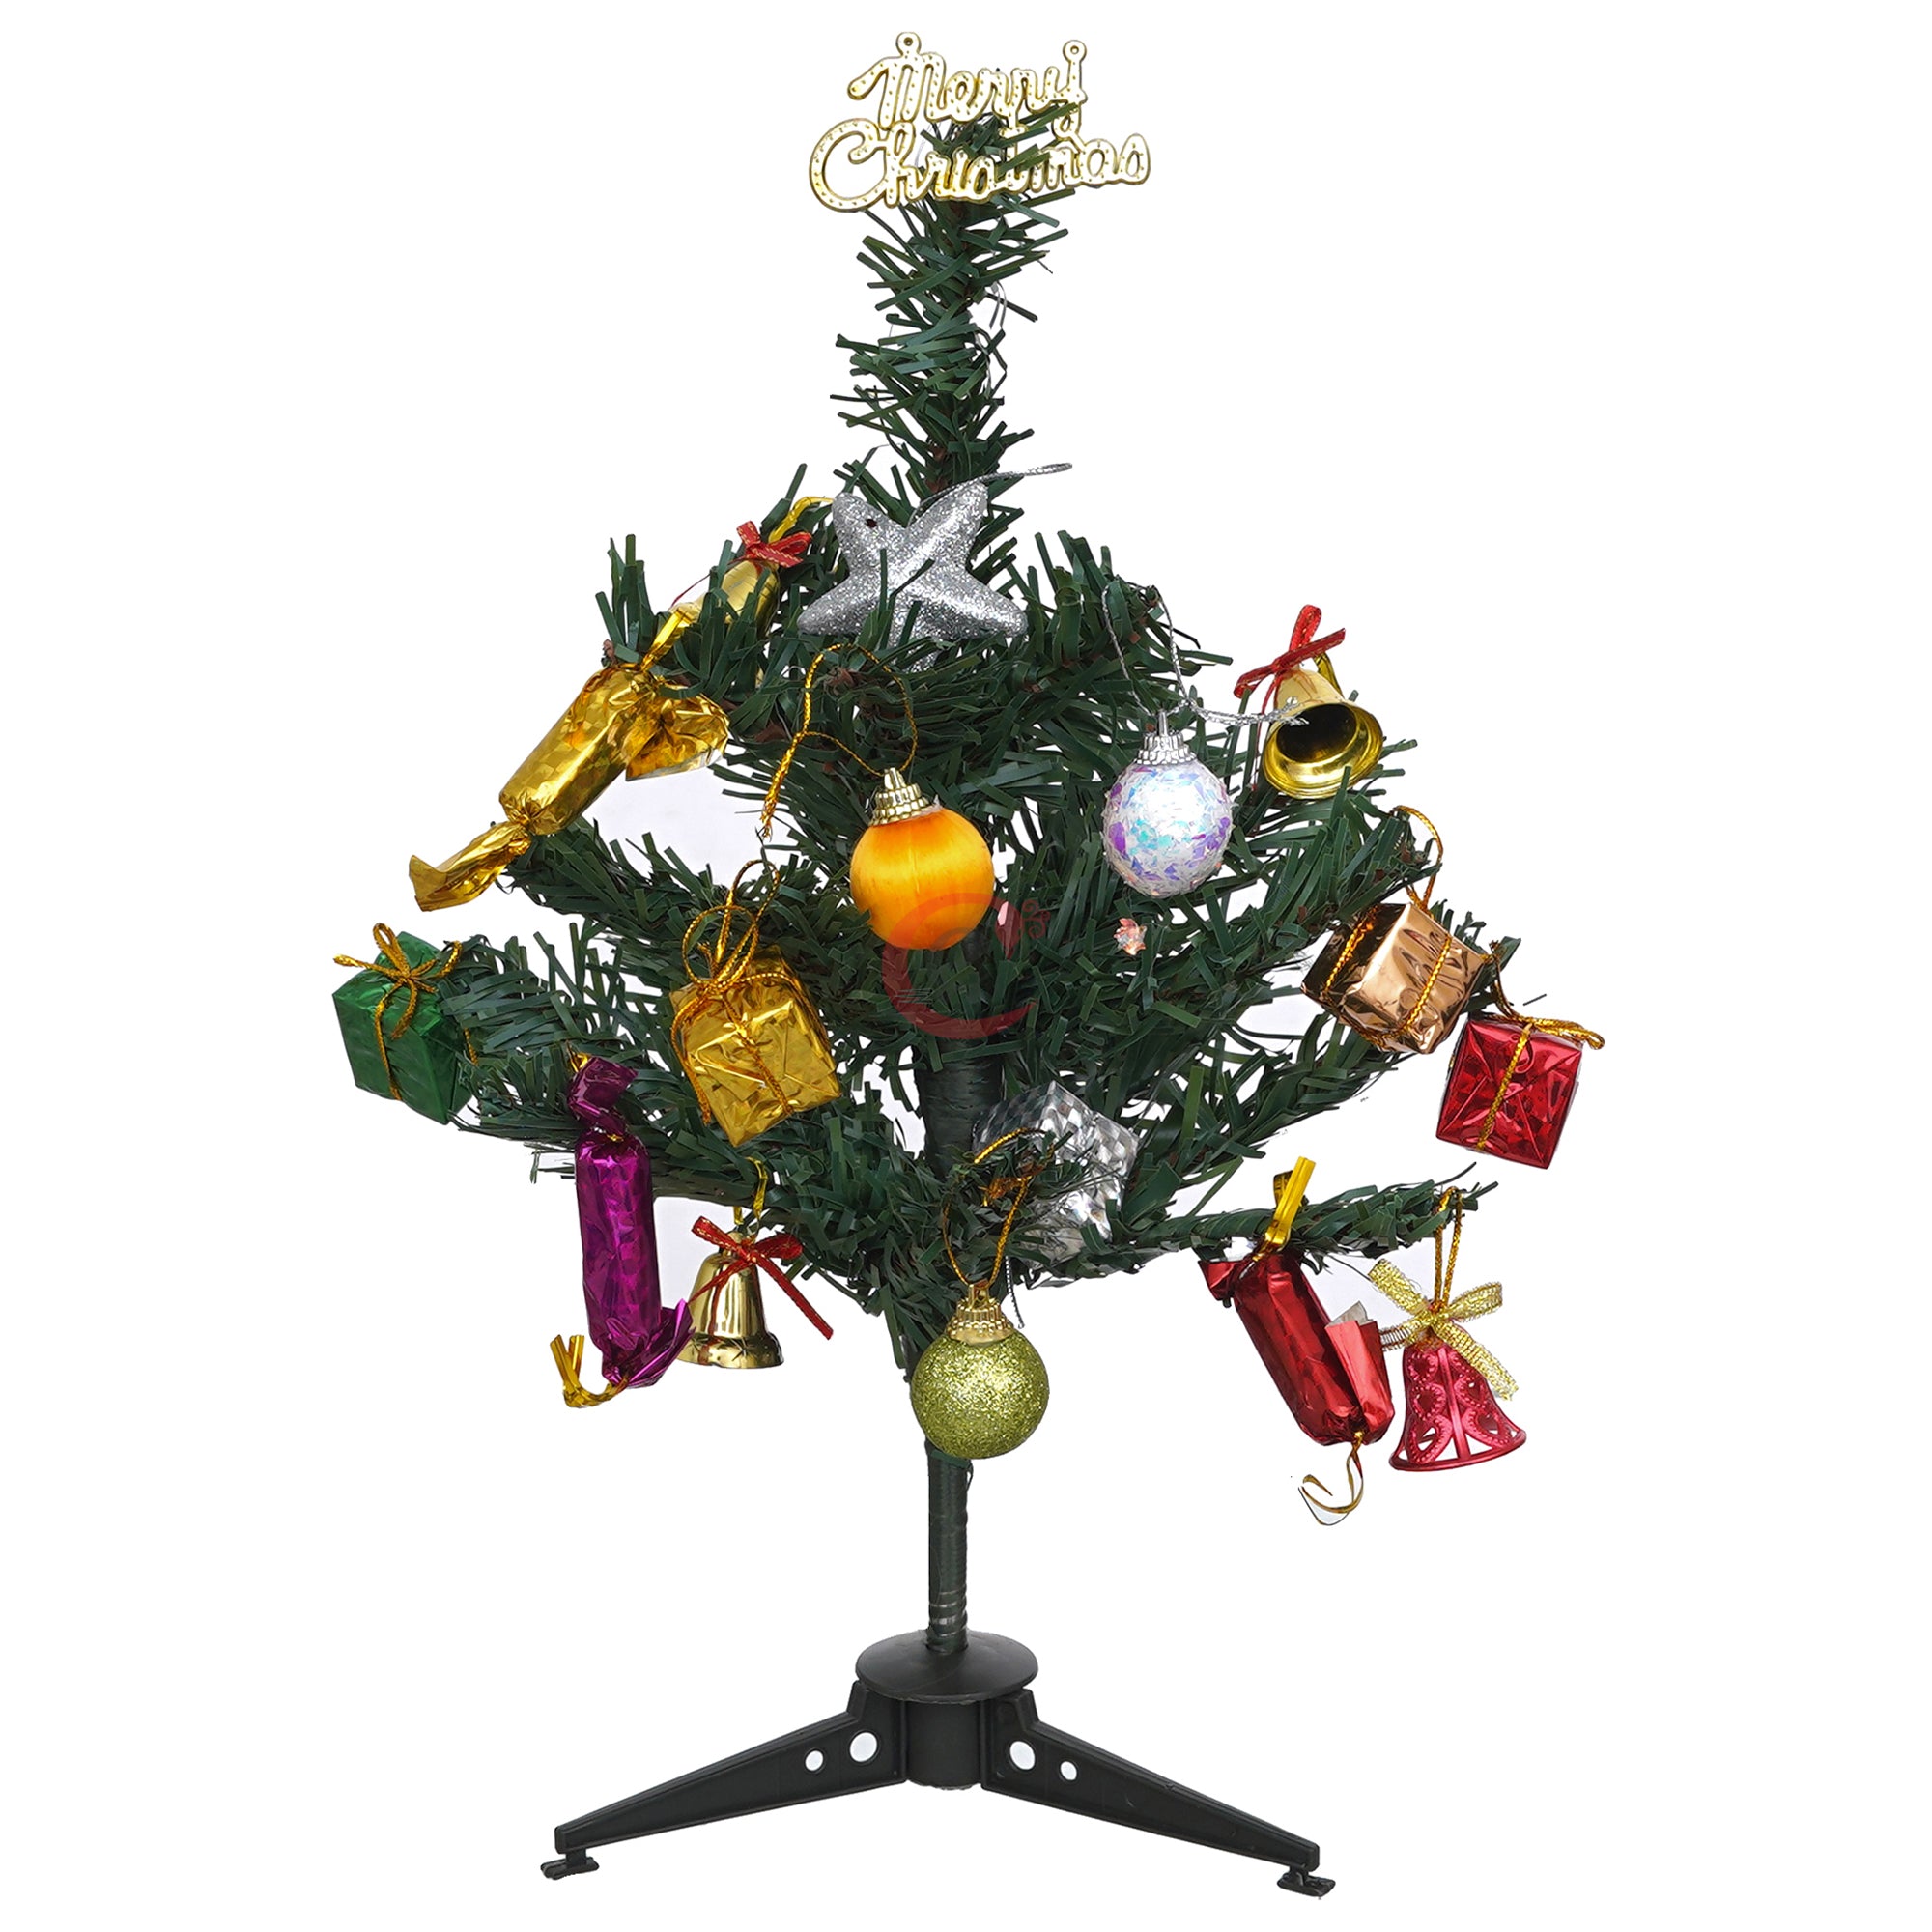 eCraftIndia 1 Feet Green Artificial Christmas Tree Xmas Pine Tree with Stand and 40 Christmas Decoration Ornaments Props - Merry Christmas Decoration Item for Home, Office, and Church 7